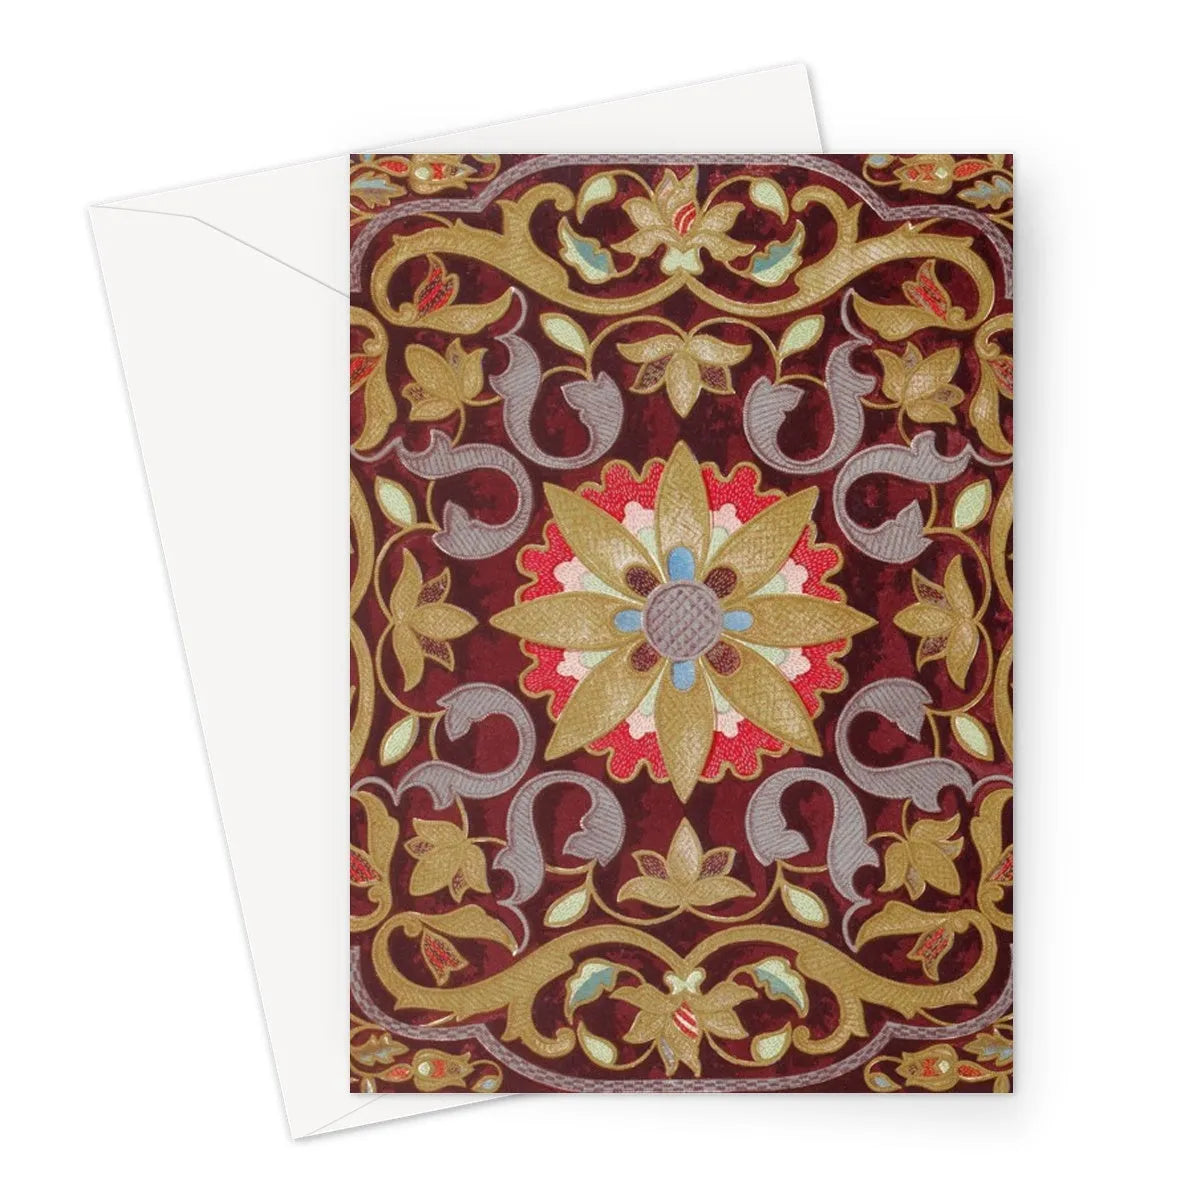 Russian Embroidery Greeting Card - A5 Portrait / 1 Card - Notebooks & Notepads - Aesthetic Art